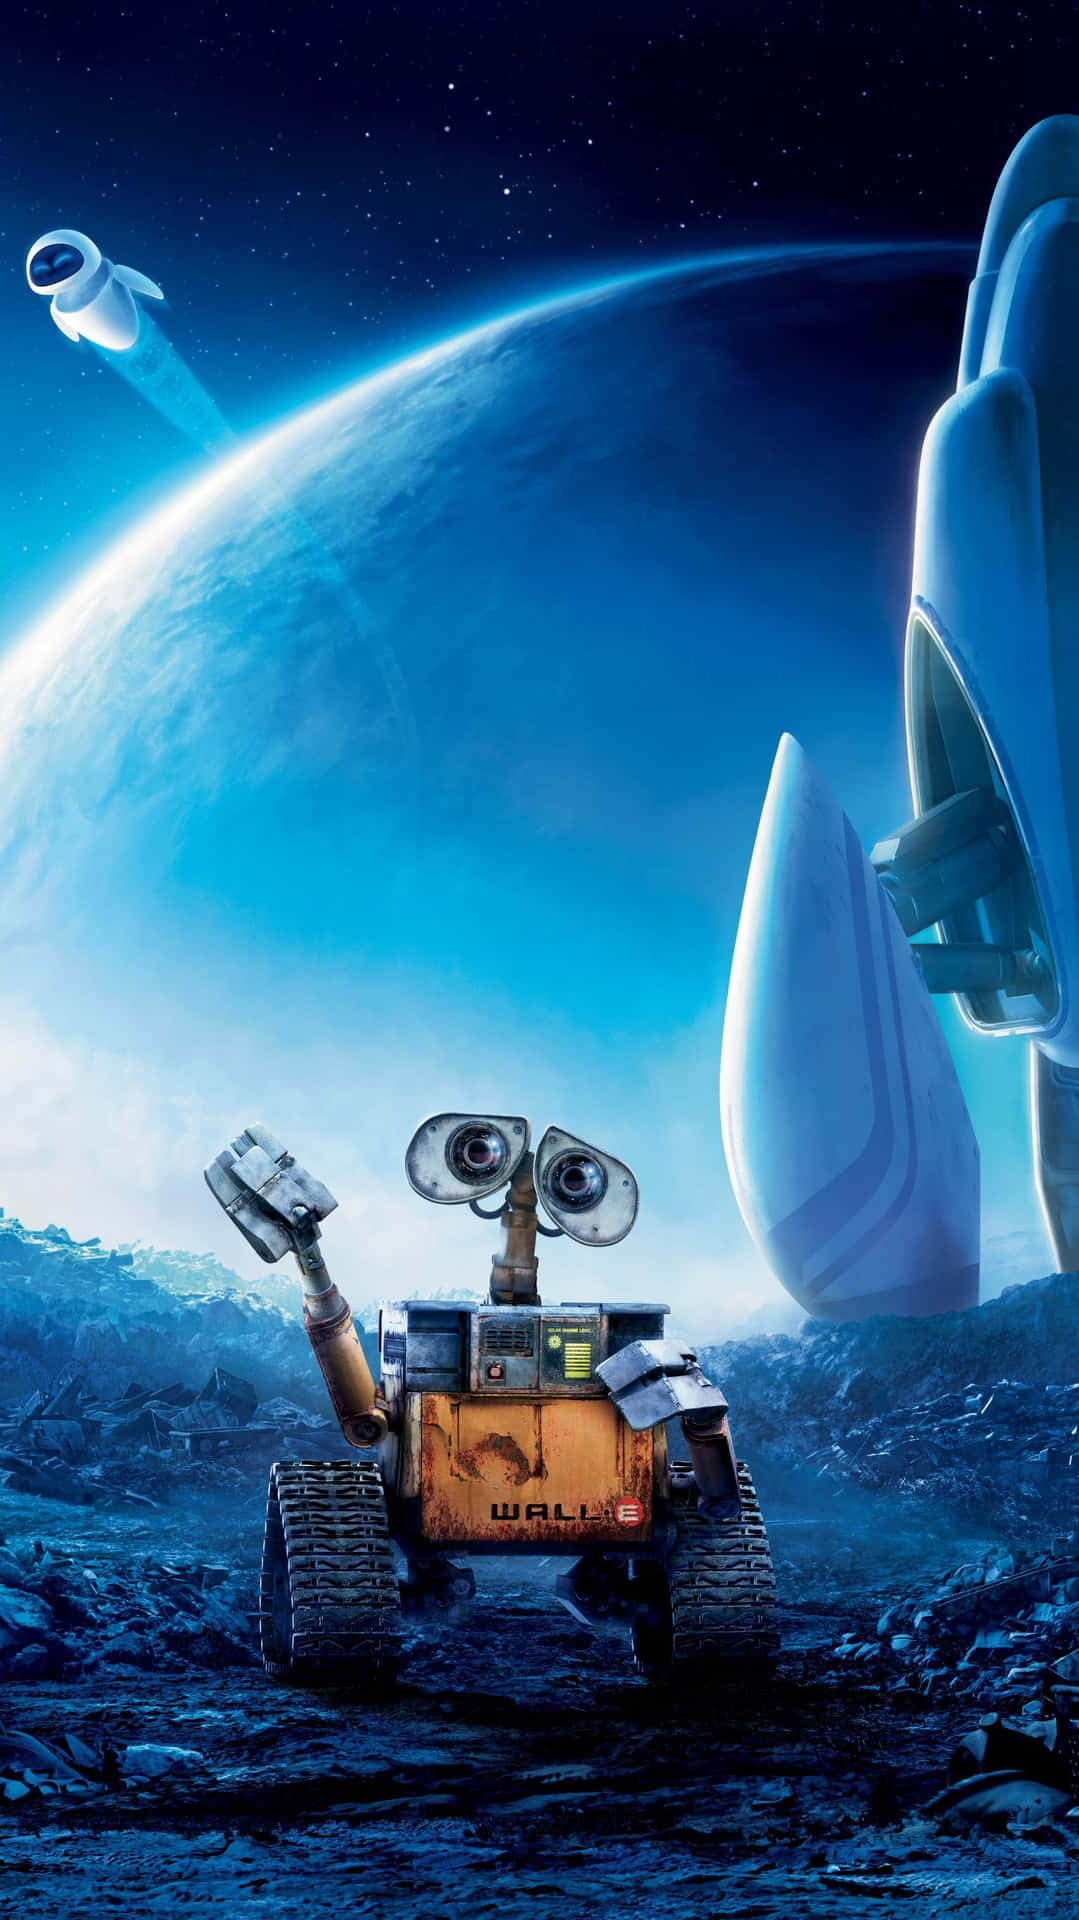 A charming moment with Wall-E on your iPhone Wallpaper